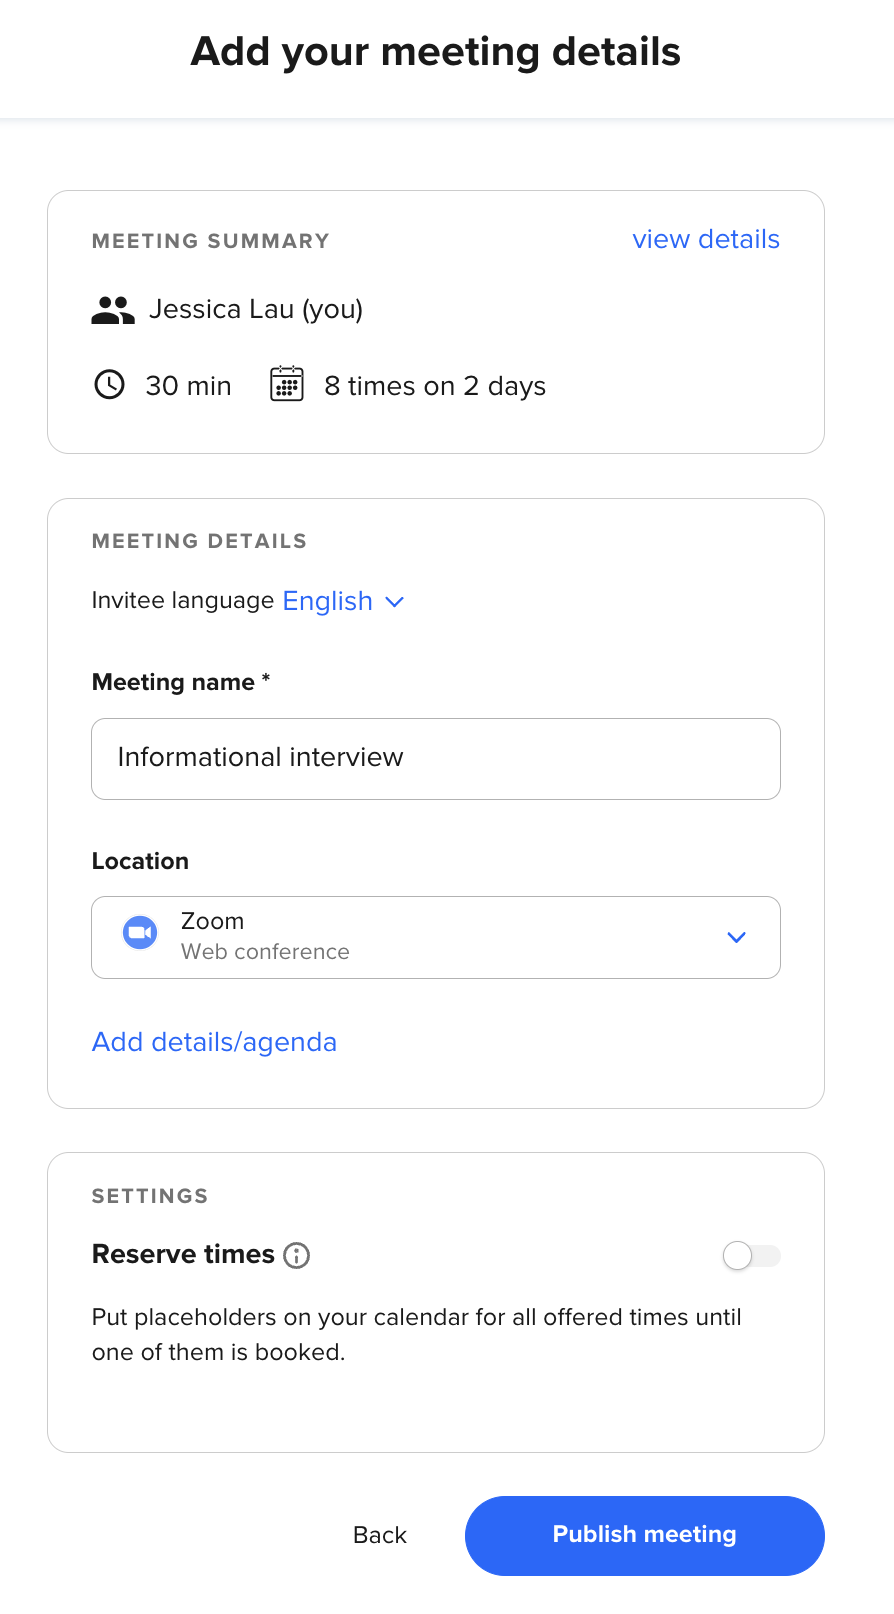 How to edit the meeting details for a one-off event in Calendly.